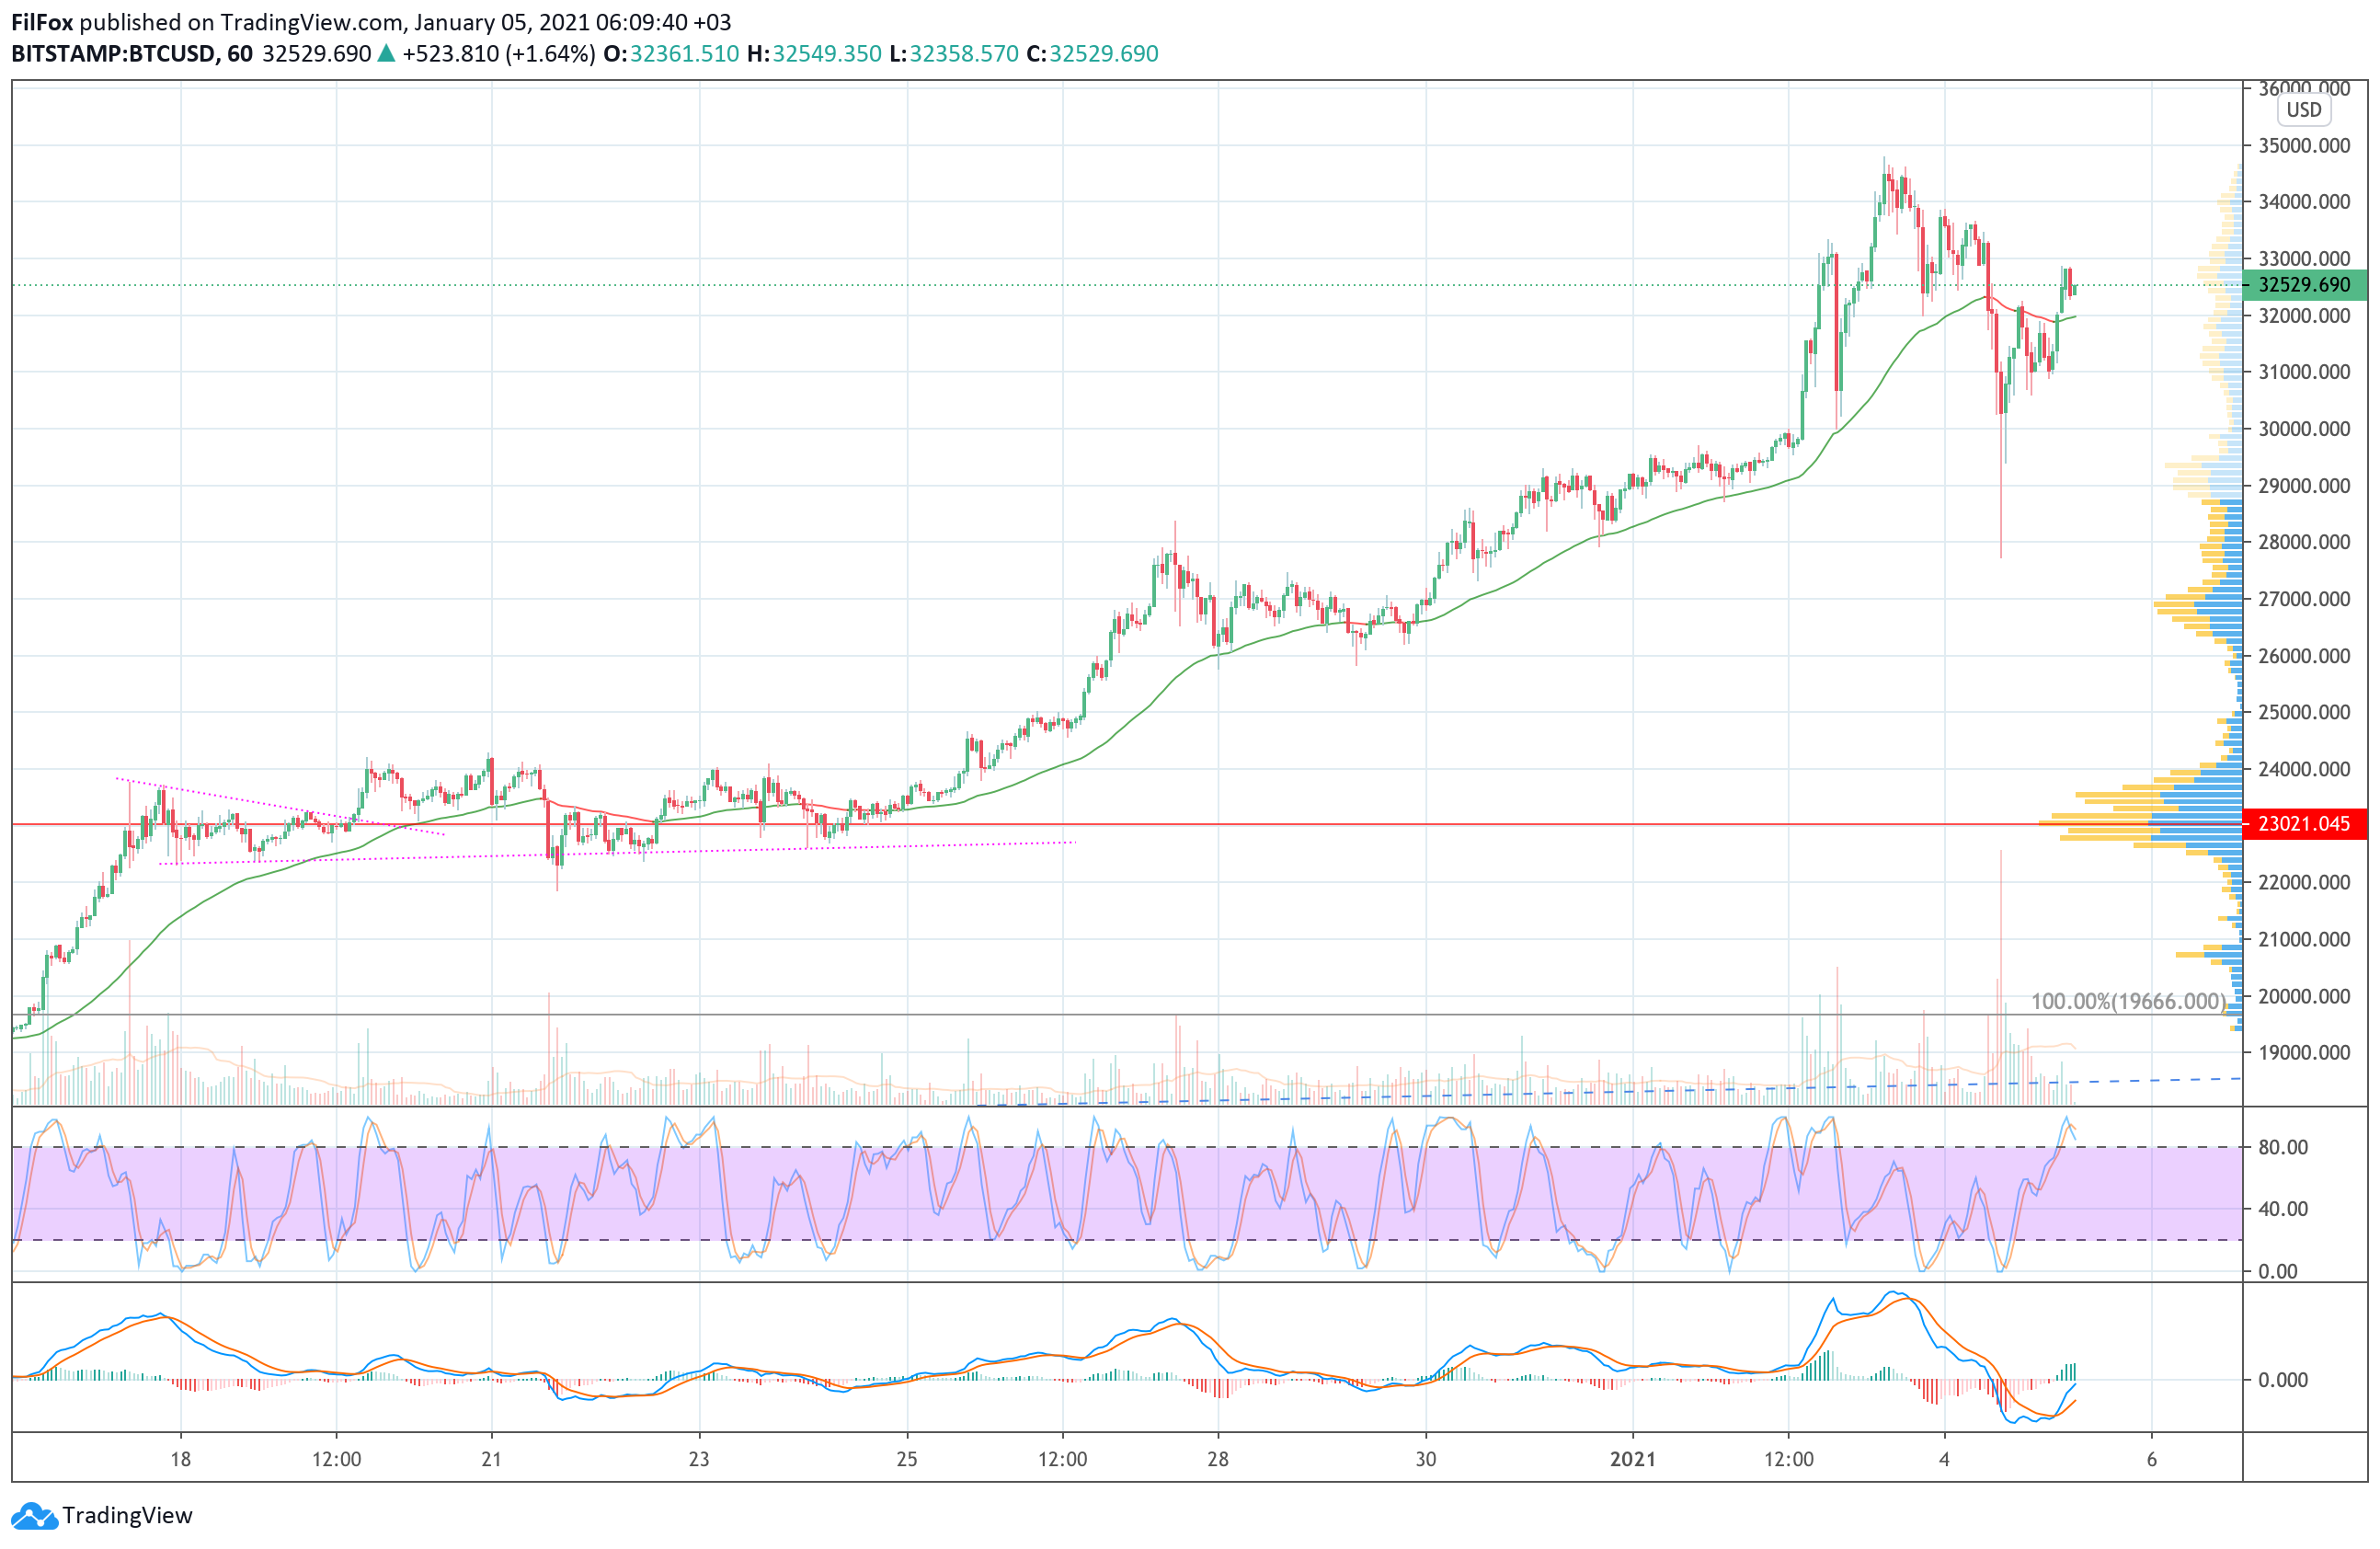 Analysis of prices for Bitcoin, Ethereum, Ripple for 01/05/2021